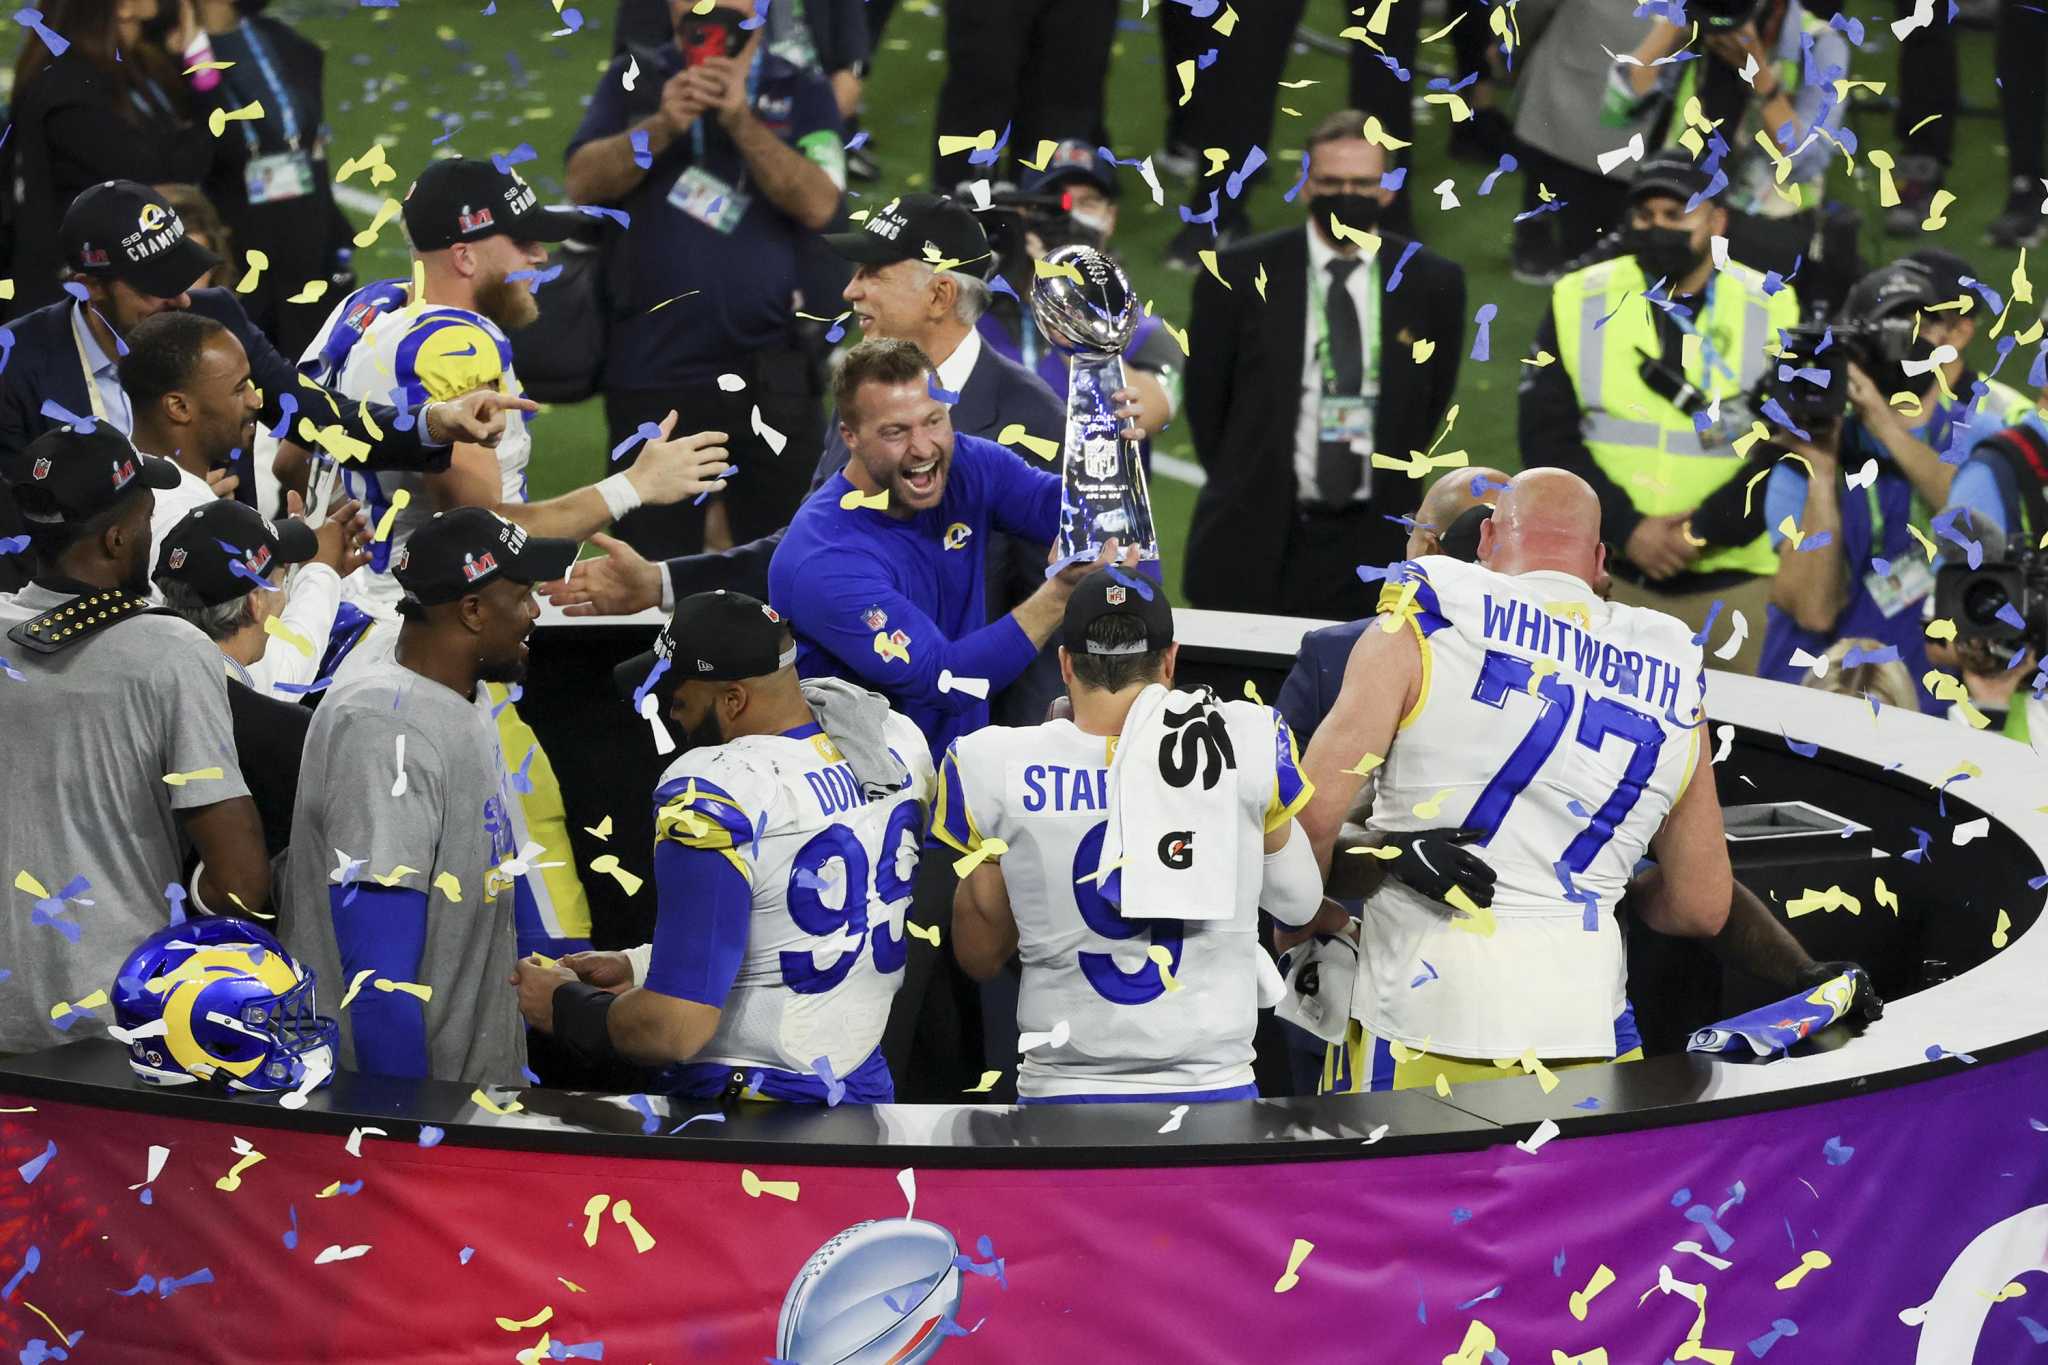 NBC SPORTS' COVERAGE OF SUPER BOWL LVI AVERAGES TOTAL AUDIENCE DELIVERY OF  112.3 MILLION VIEWERS, REACHES 167 MILLION VIEWERS ON UNPRECEDENTED DAY IN  SPORTS MEDIA HISTORY - NBC Sports PressboxNBC Sports Pressbox